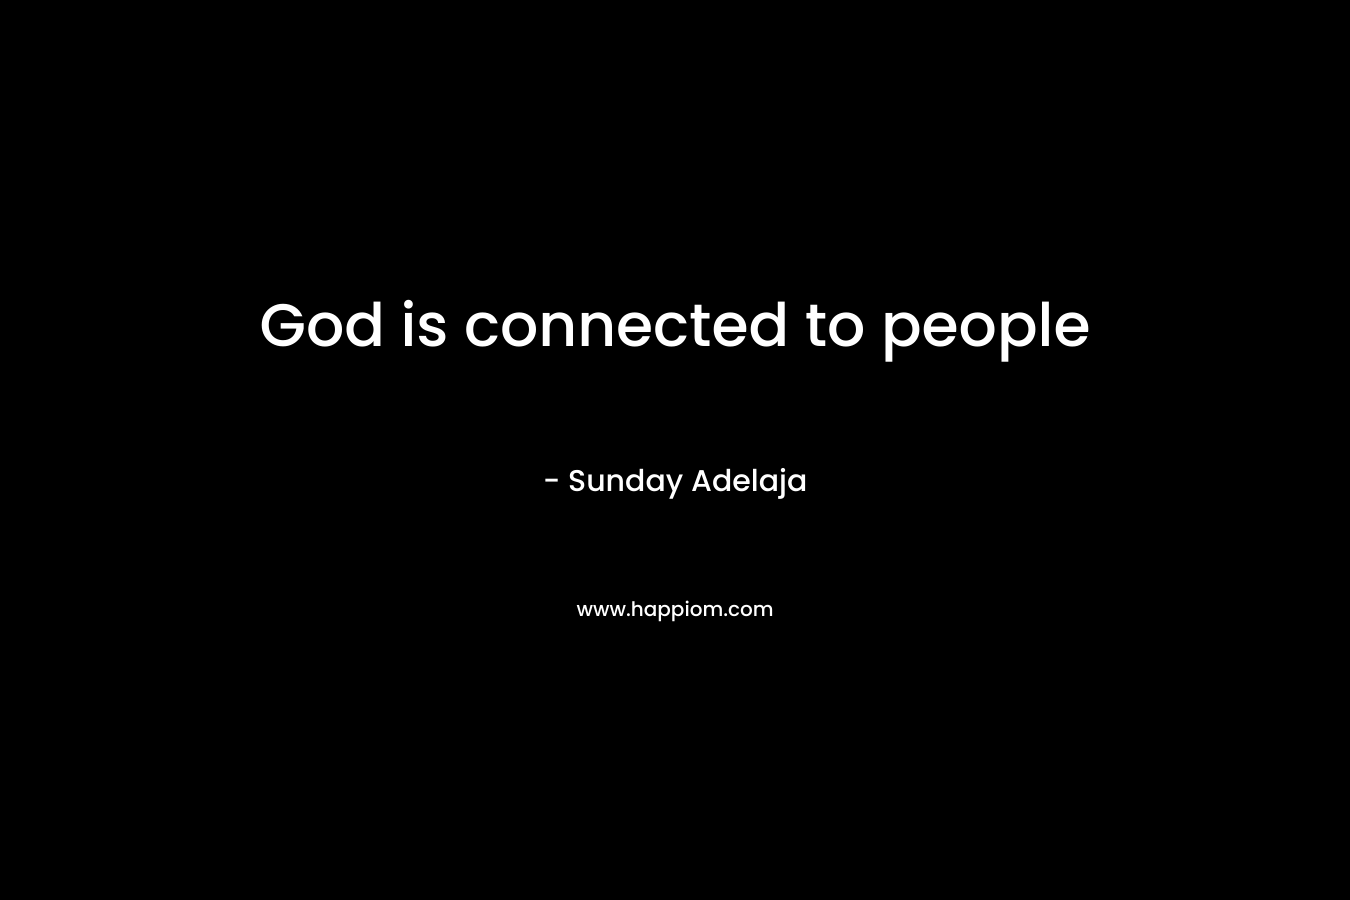 God is connected to people